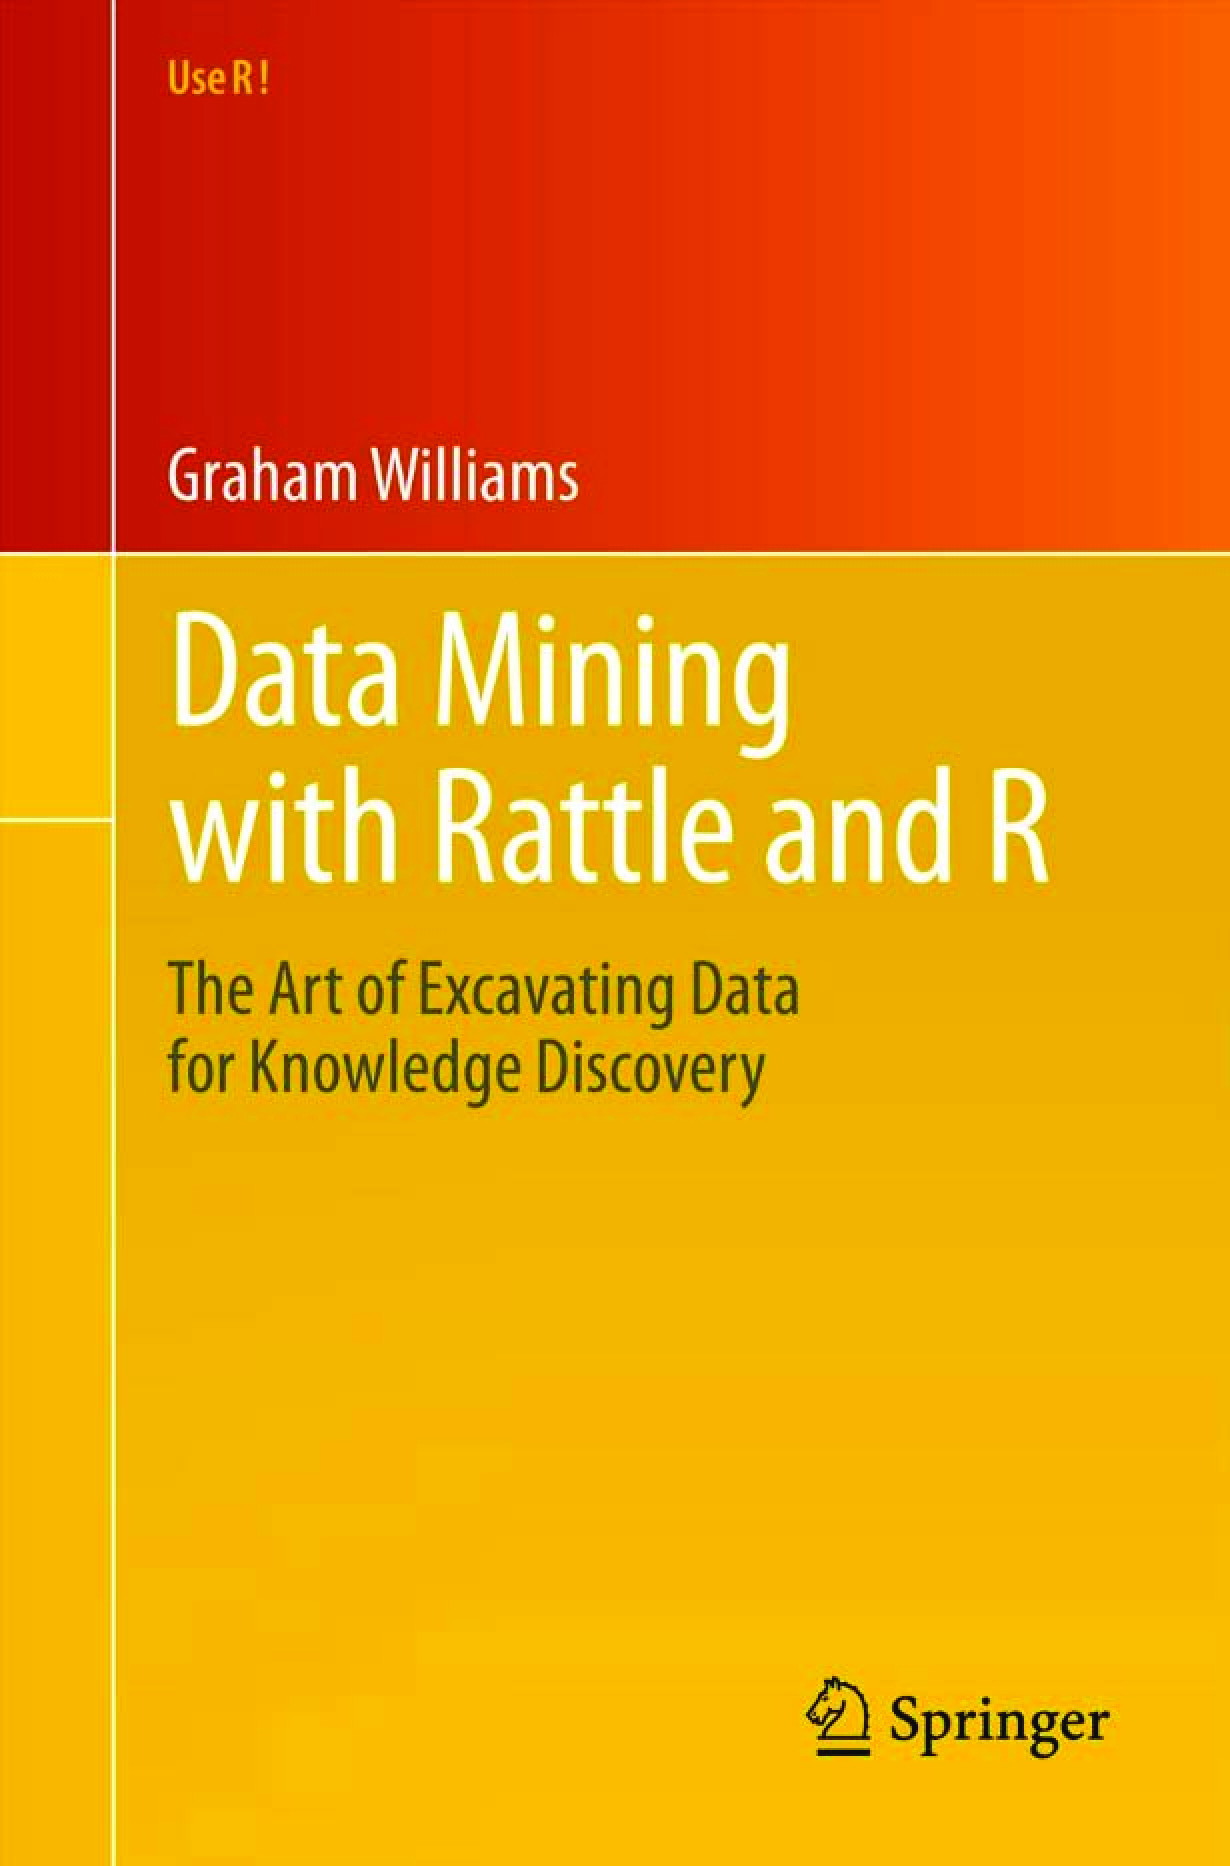 Data_Mining_With_Rattle_&_R–Graham_Williams